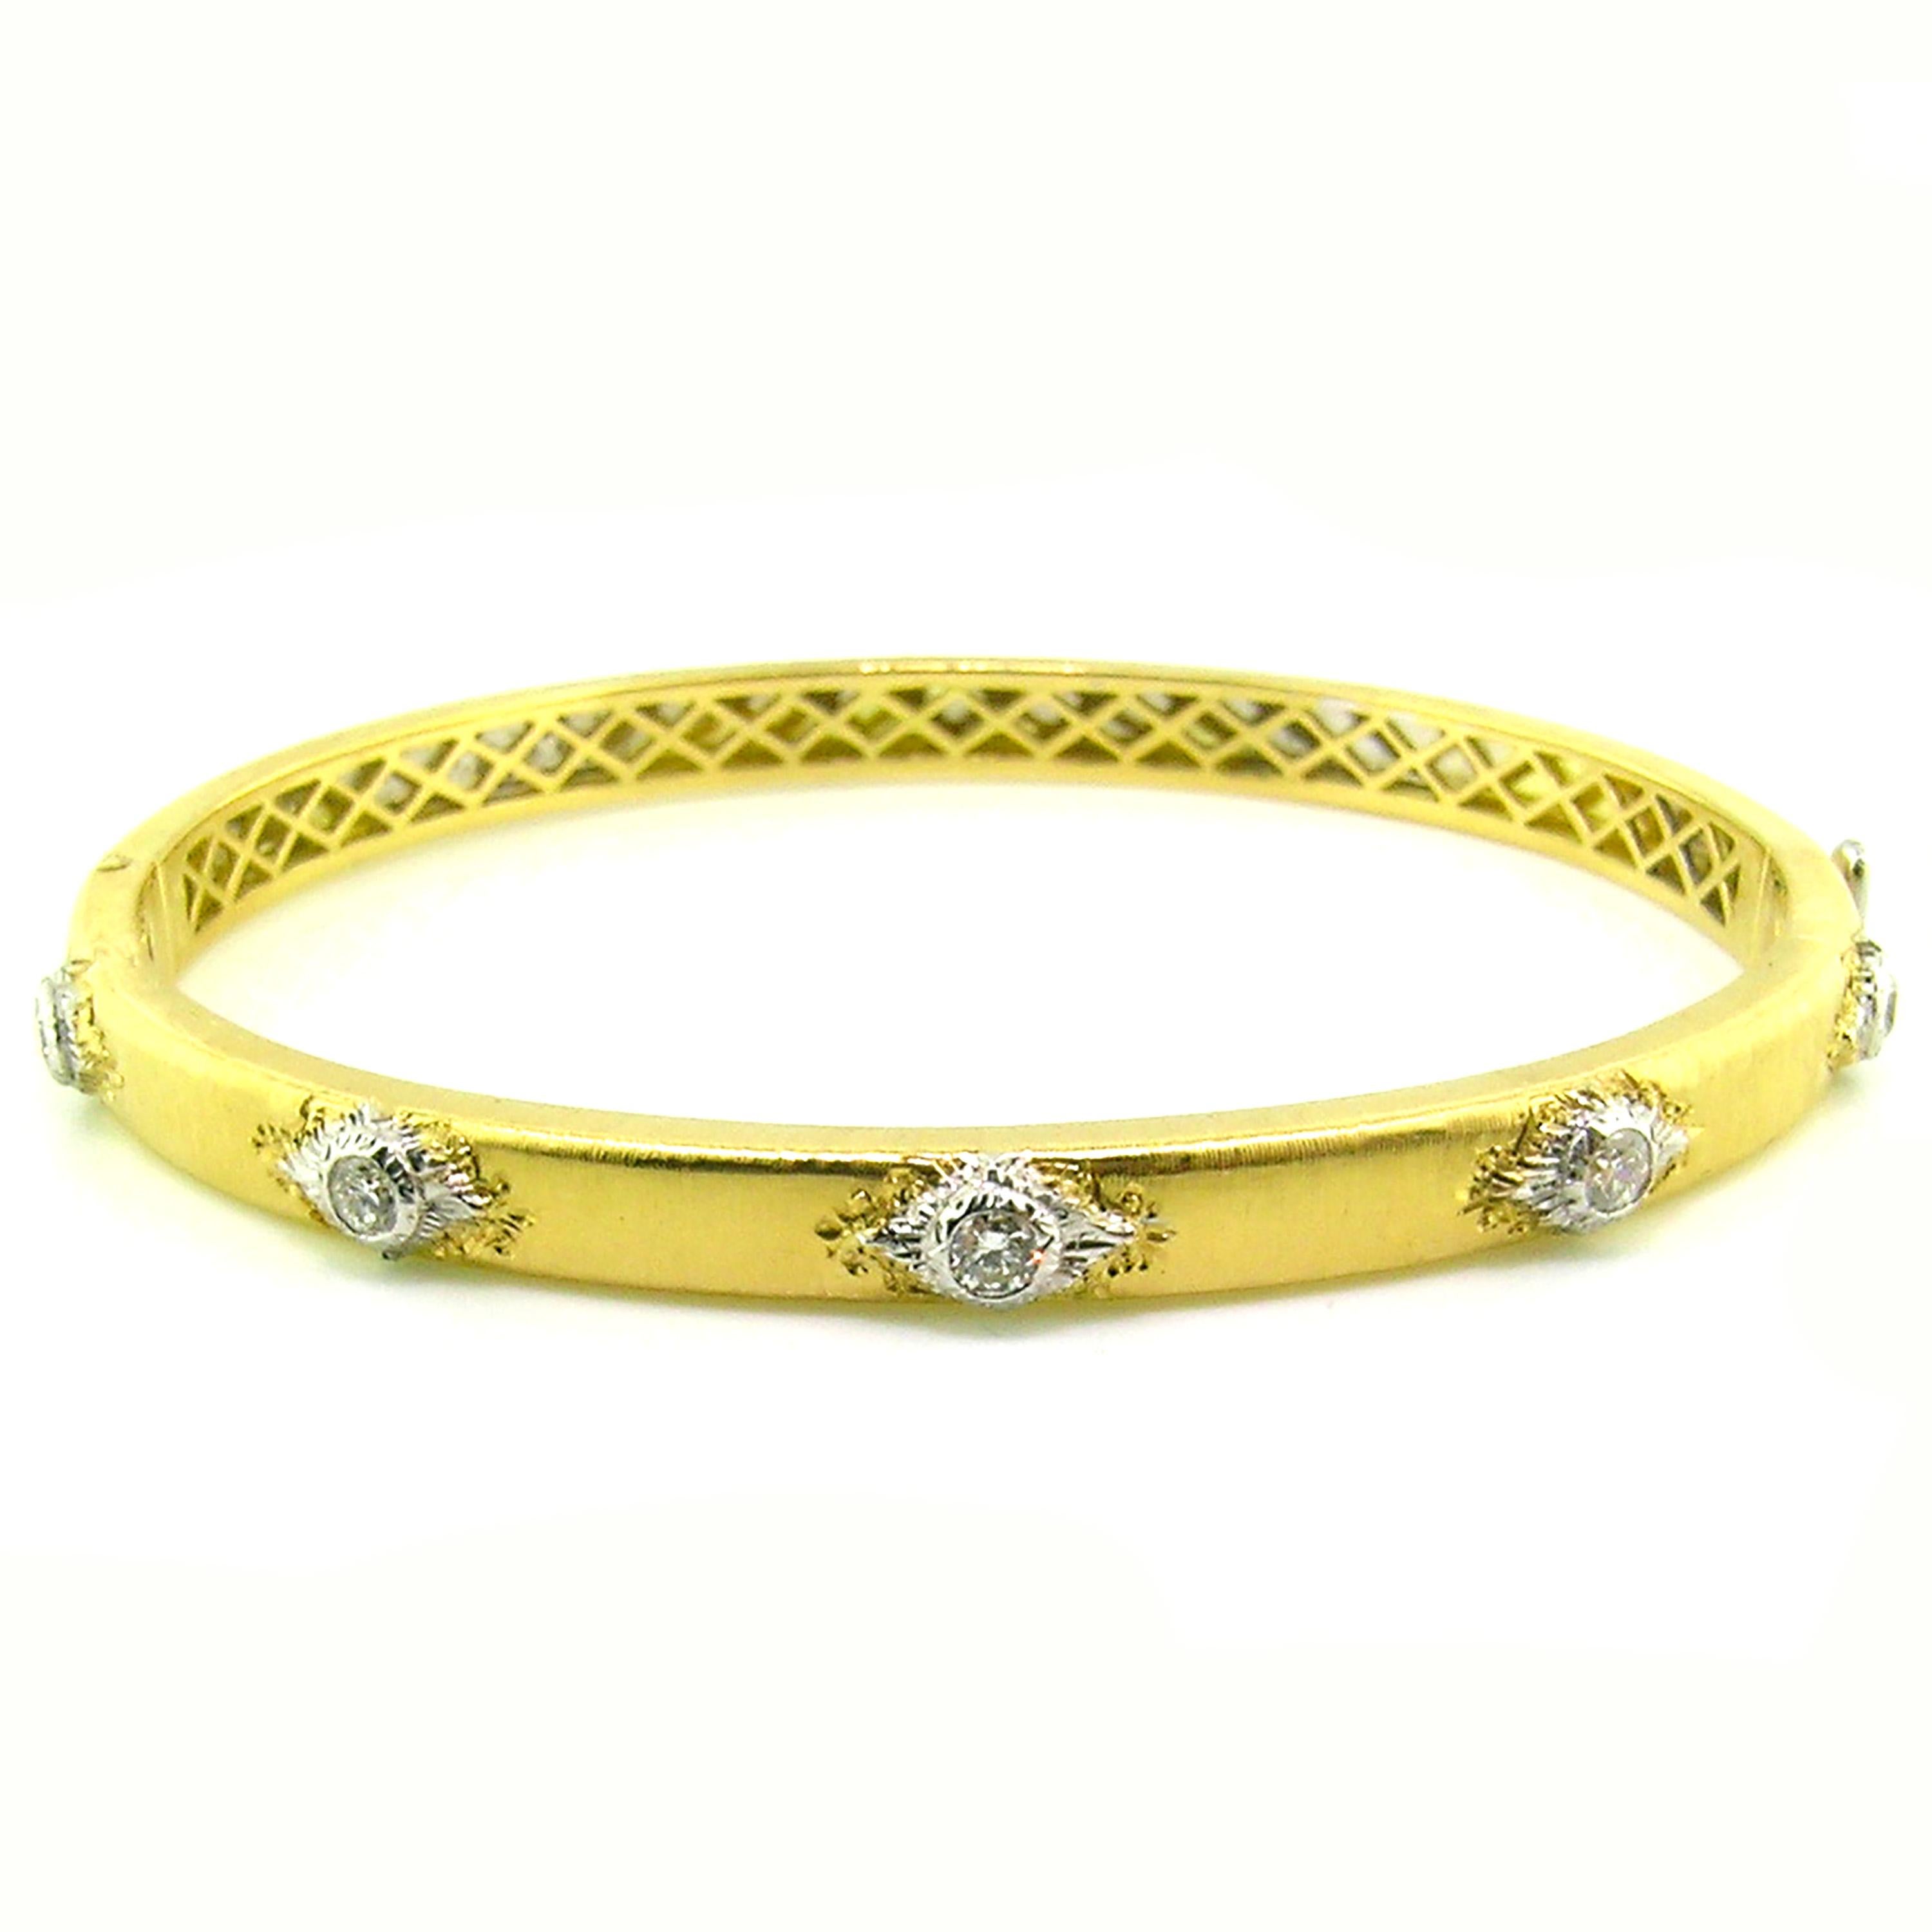 The Valentina Bangle is a classic staple for any jewelry wardrobe. Exquisitely executed details and fine diamonds are framed in an oval bangle which is perfectly suited to everyday wear. This bangle is especially fantastic when stacked in all three